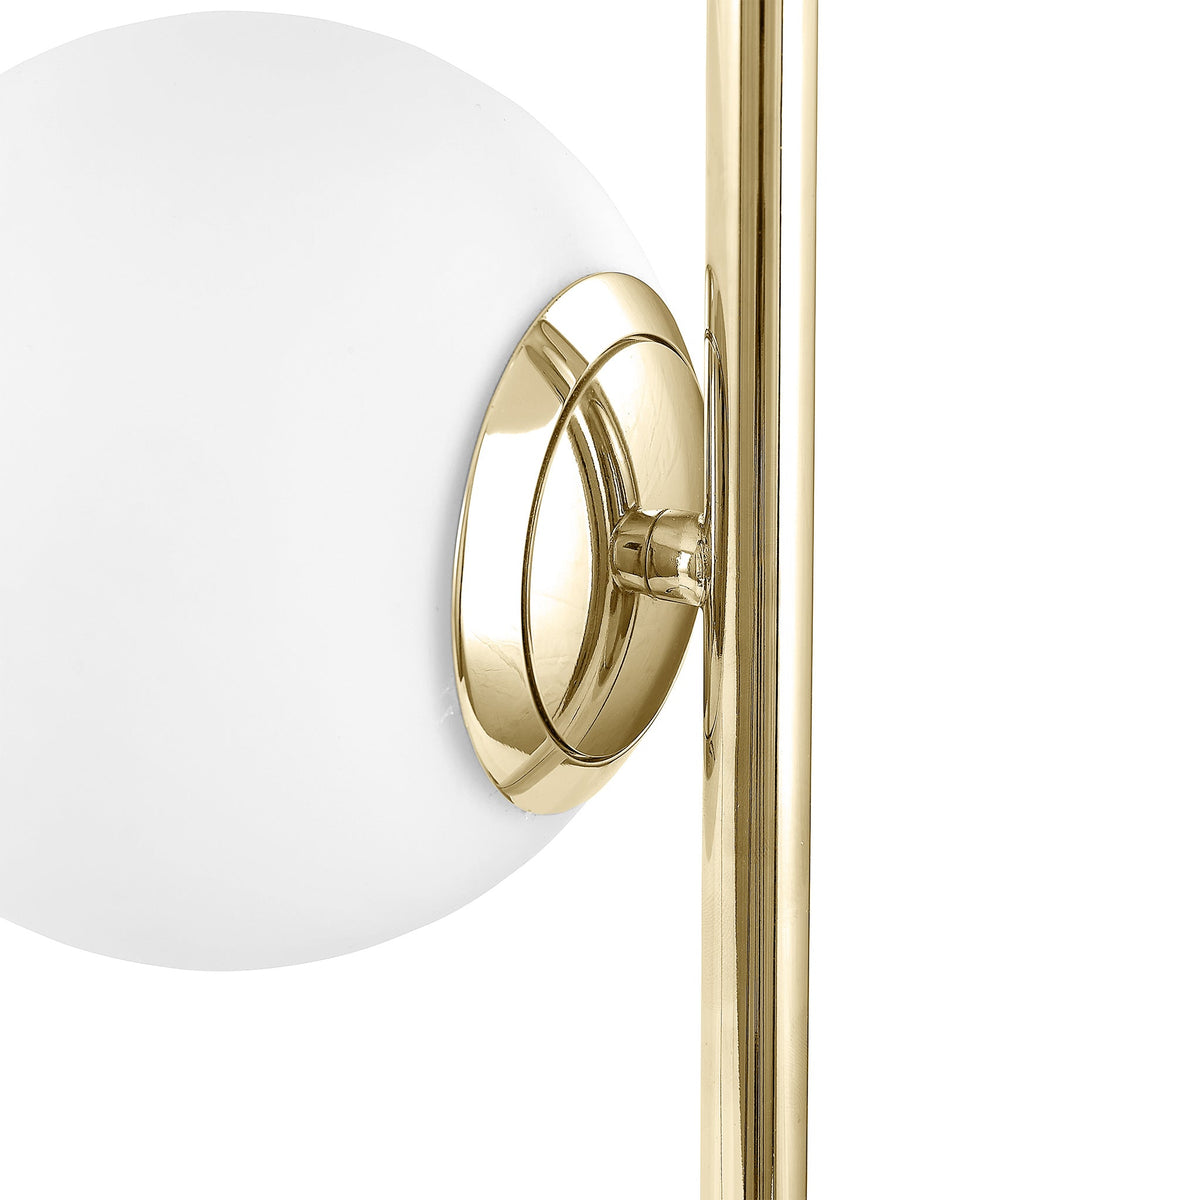 Asterope White Orb and Gold Metal Floor Lamp